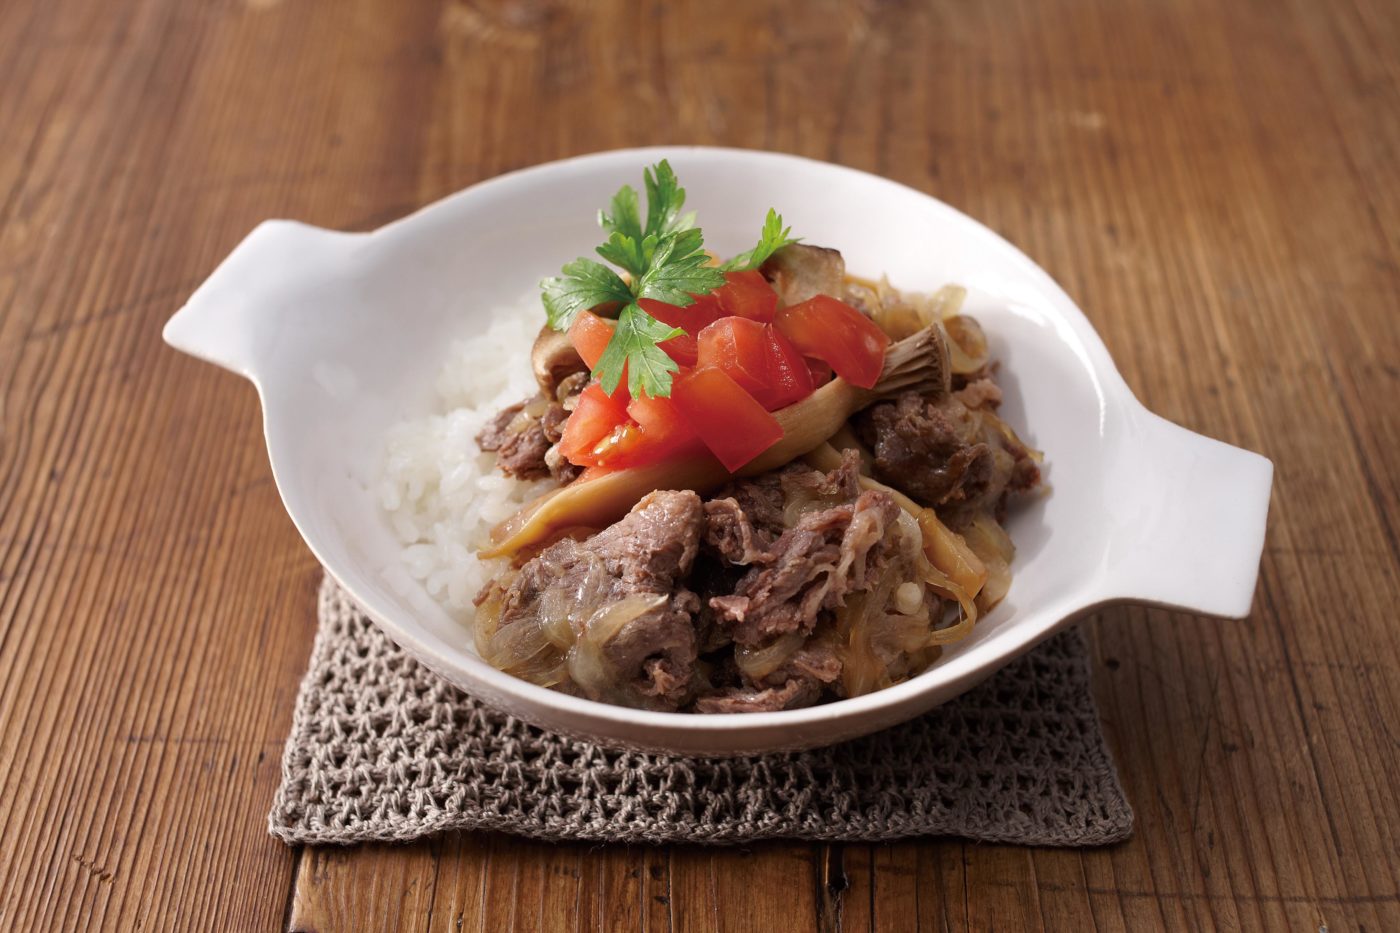 While this Italian beef bowl pulls its fair share of Mediterranean flavors from fresh ingredients like Italian parsley and tomatoes, the blueprint for thel dish actually comes from a well known Japanese dish - gyudon. #beefbowl #ricecooker #ricebowl | Tiger USA